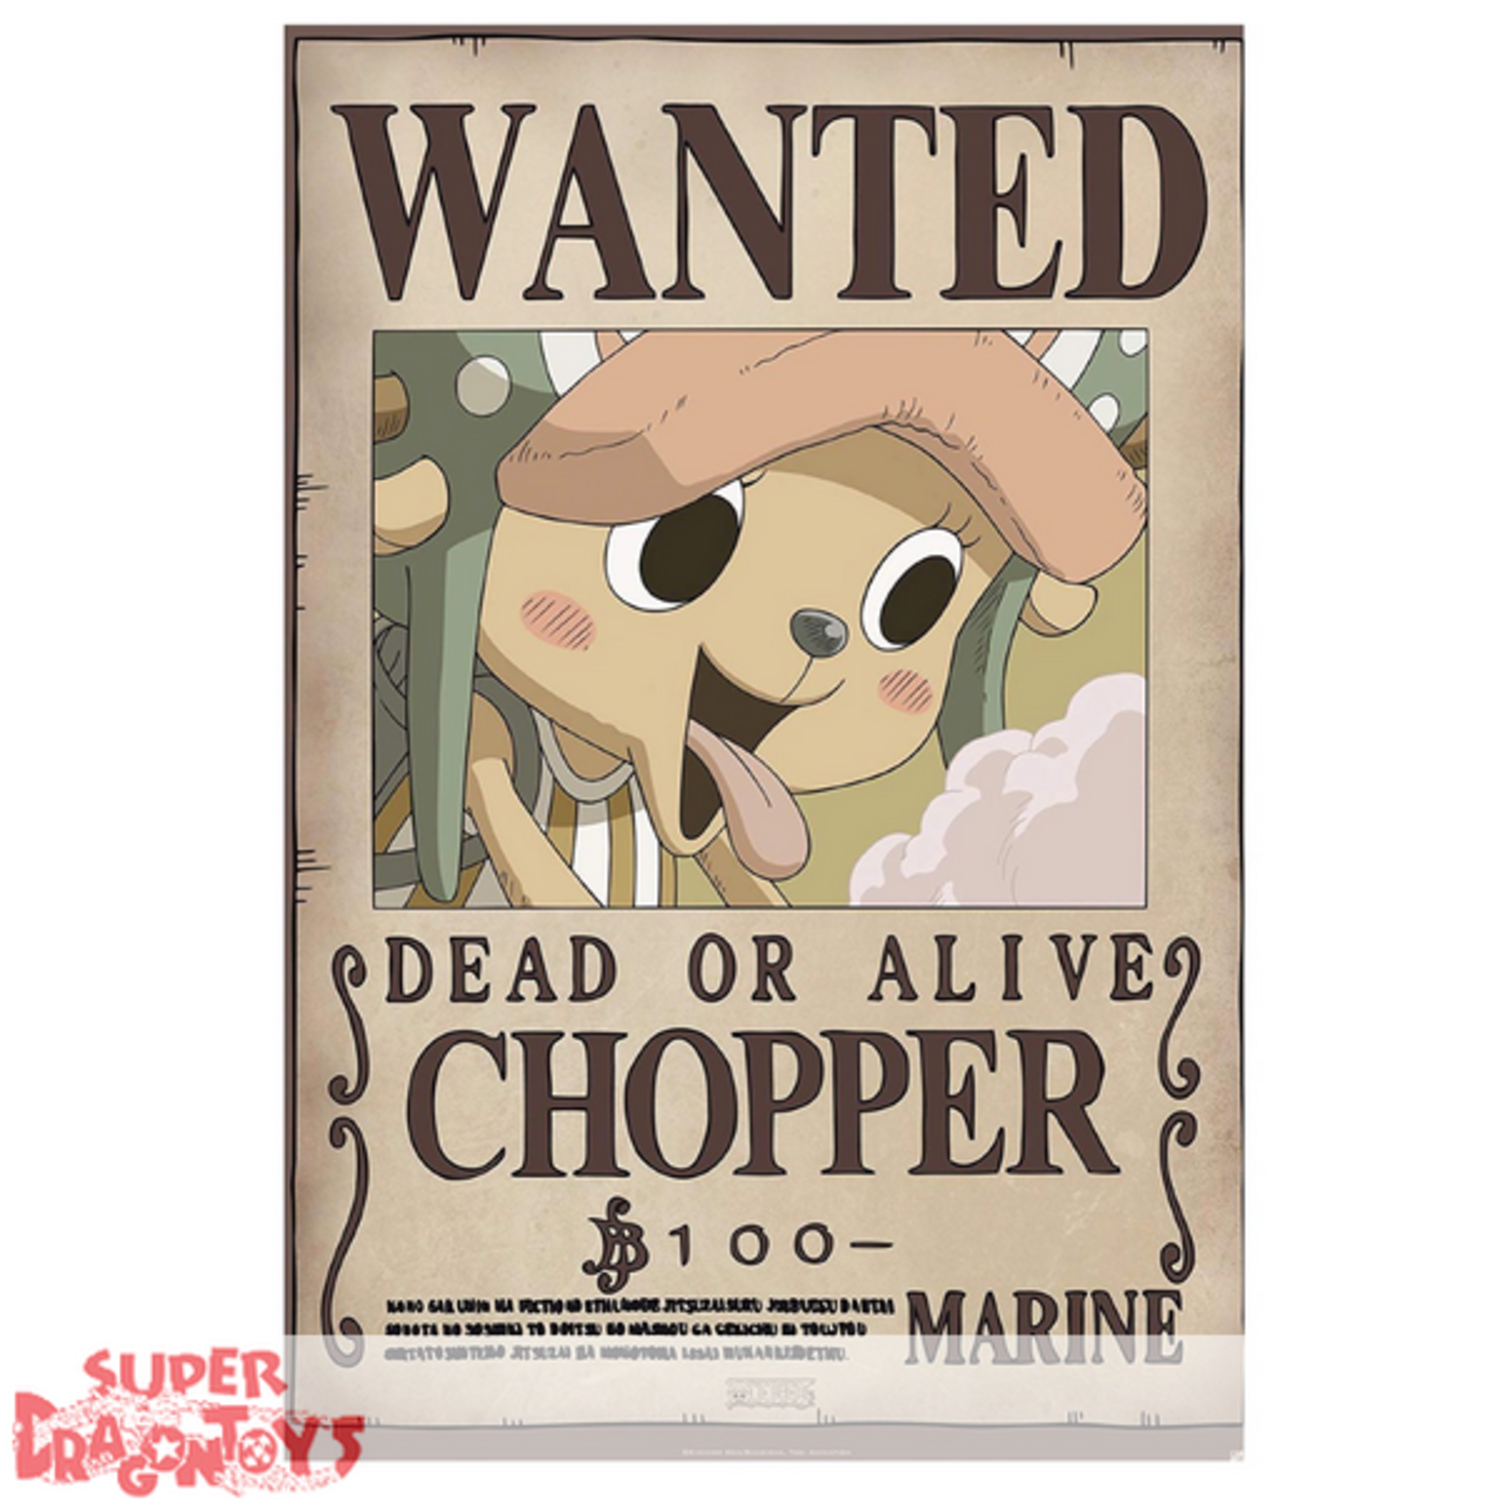 Prime Chopper 1000 Berries - Poster One Piece